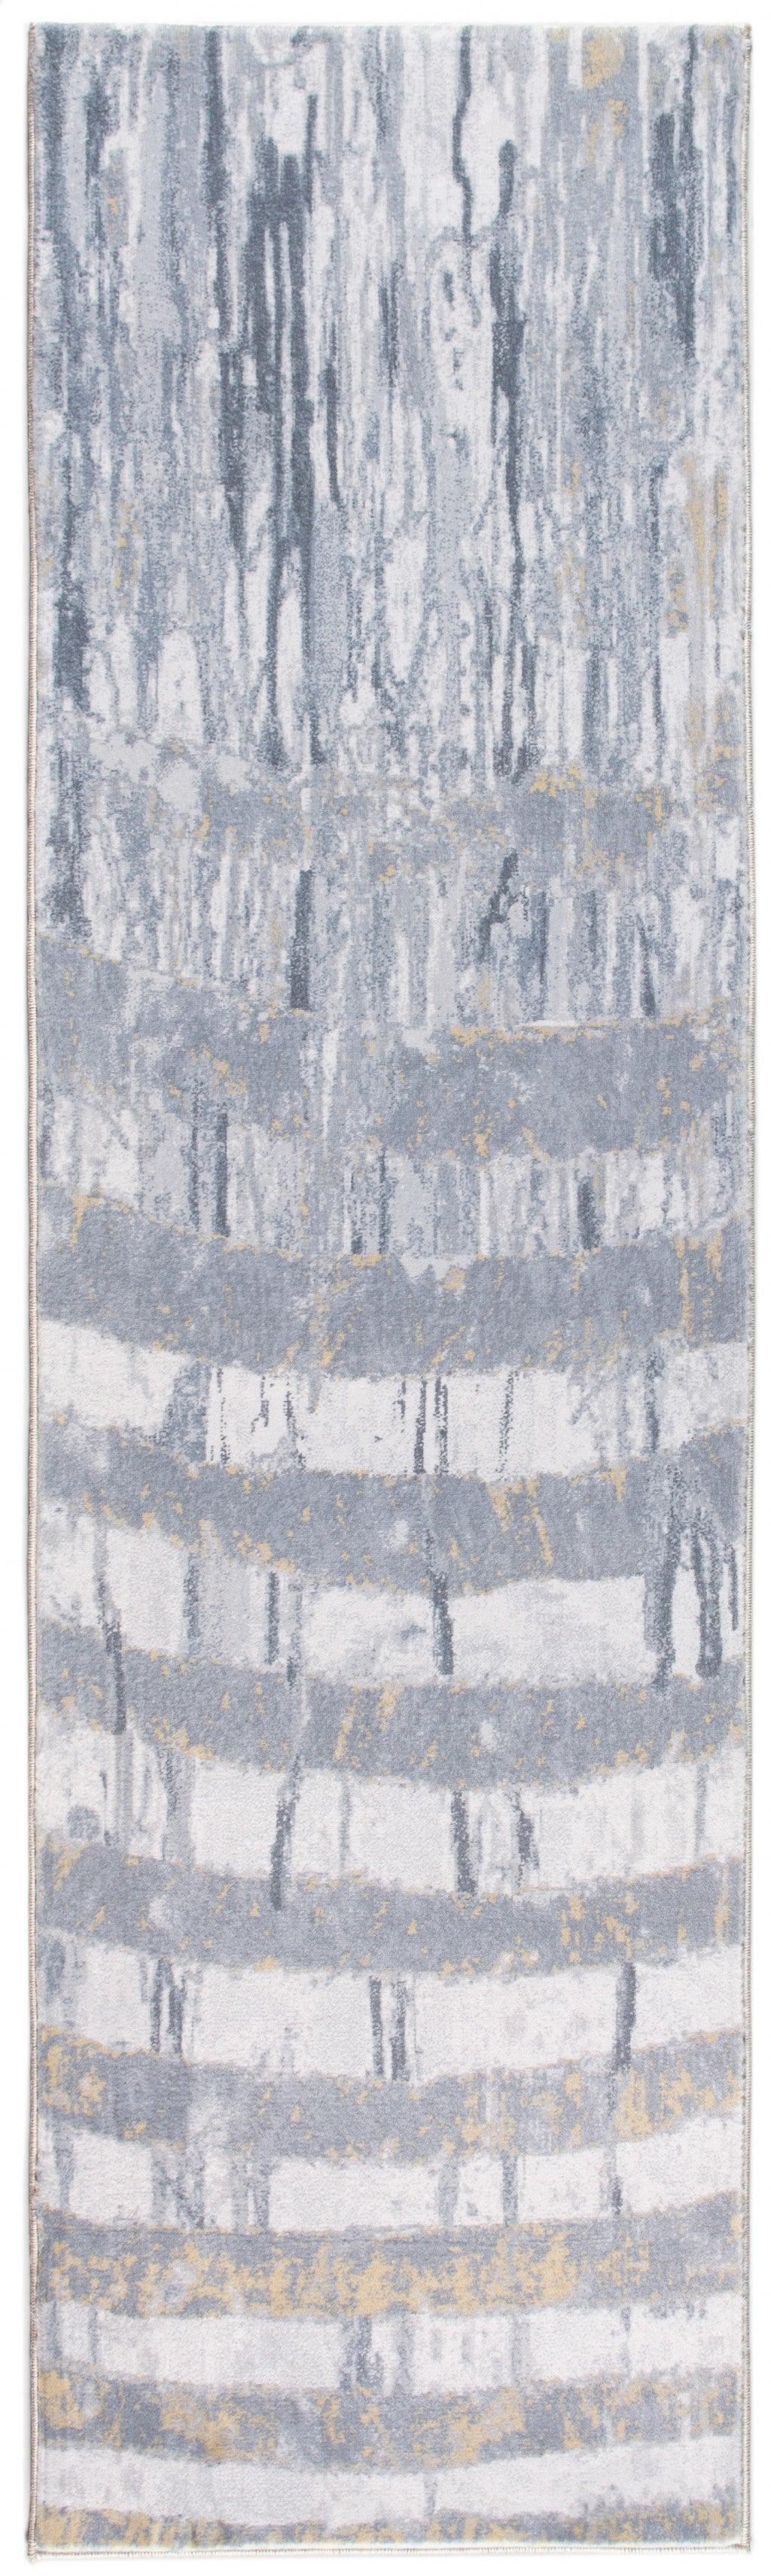 8’ x 10’ Gray Distressed Steps Abstract Area Rug